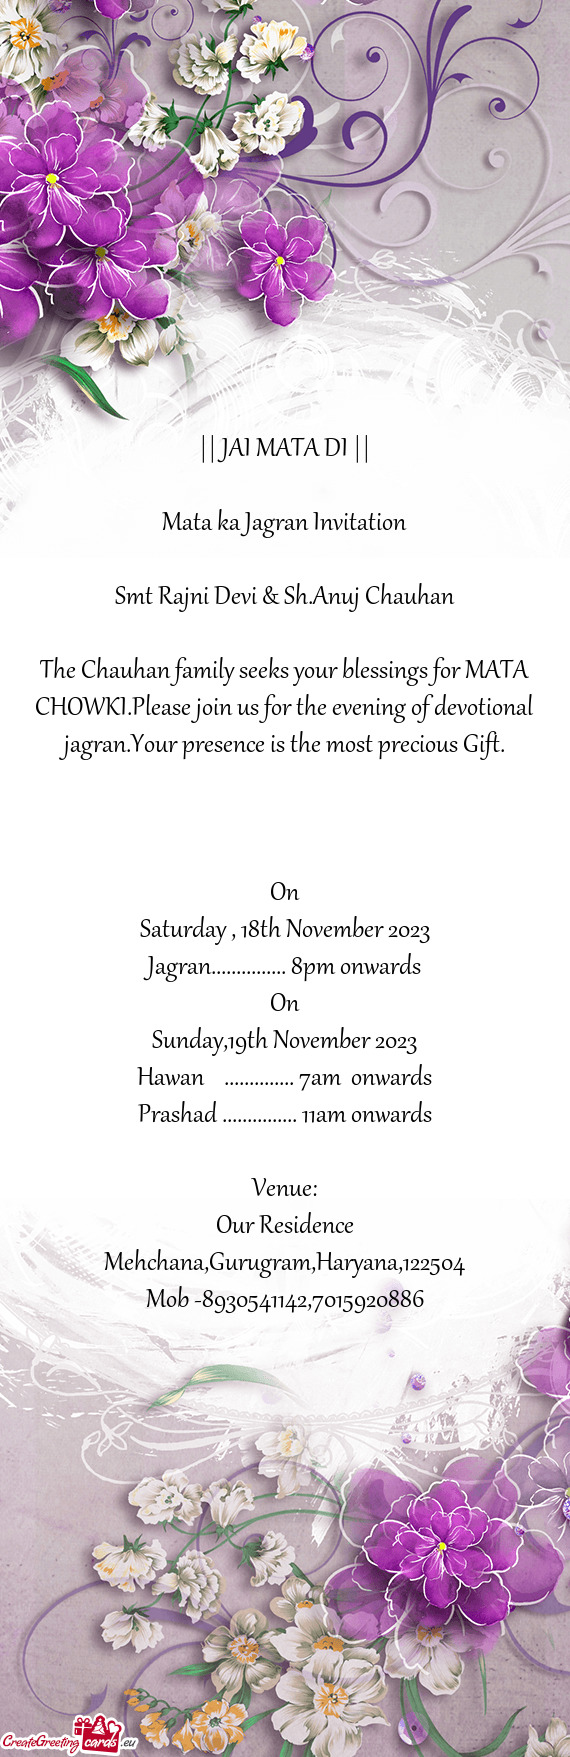 The Chauhan family seeks your blessings for MATA CHOWKI.Please join us for the evening of devotional